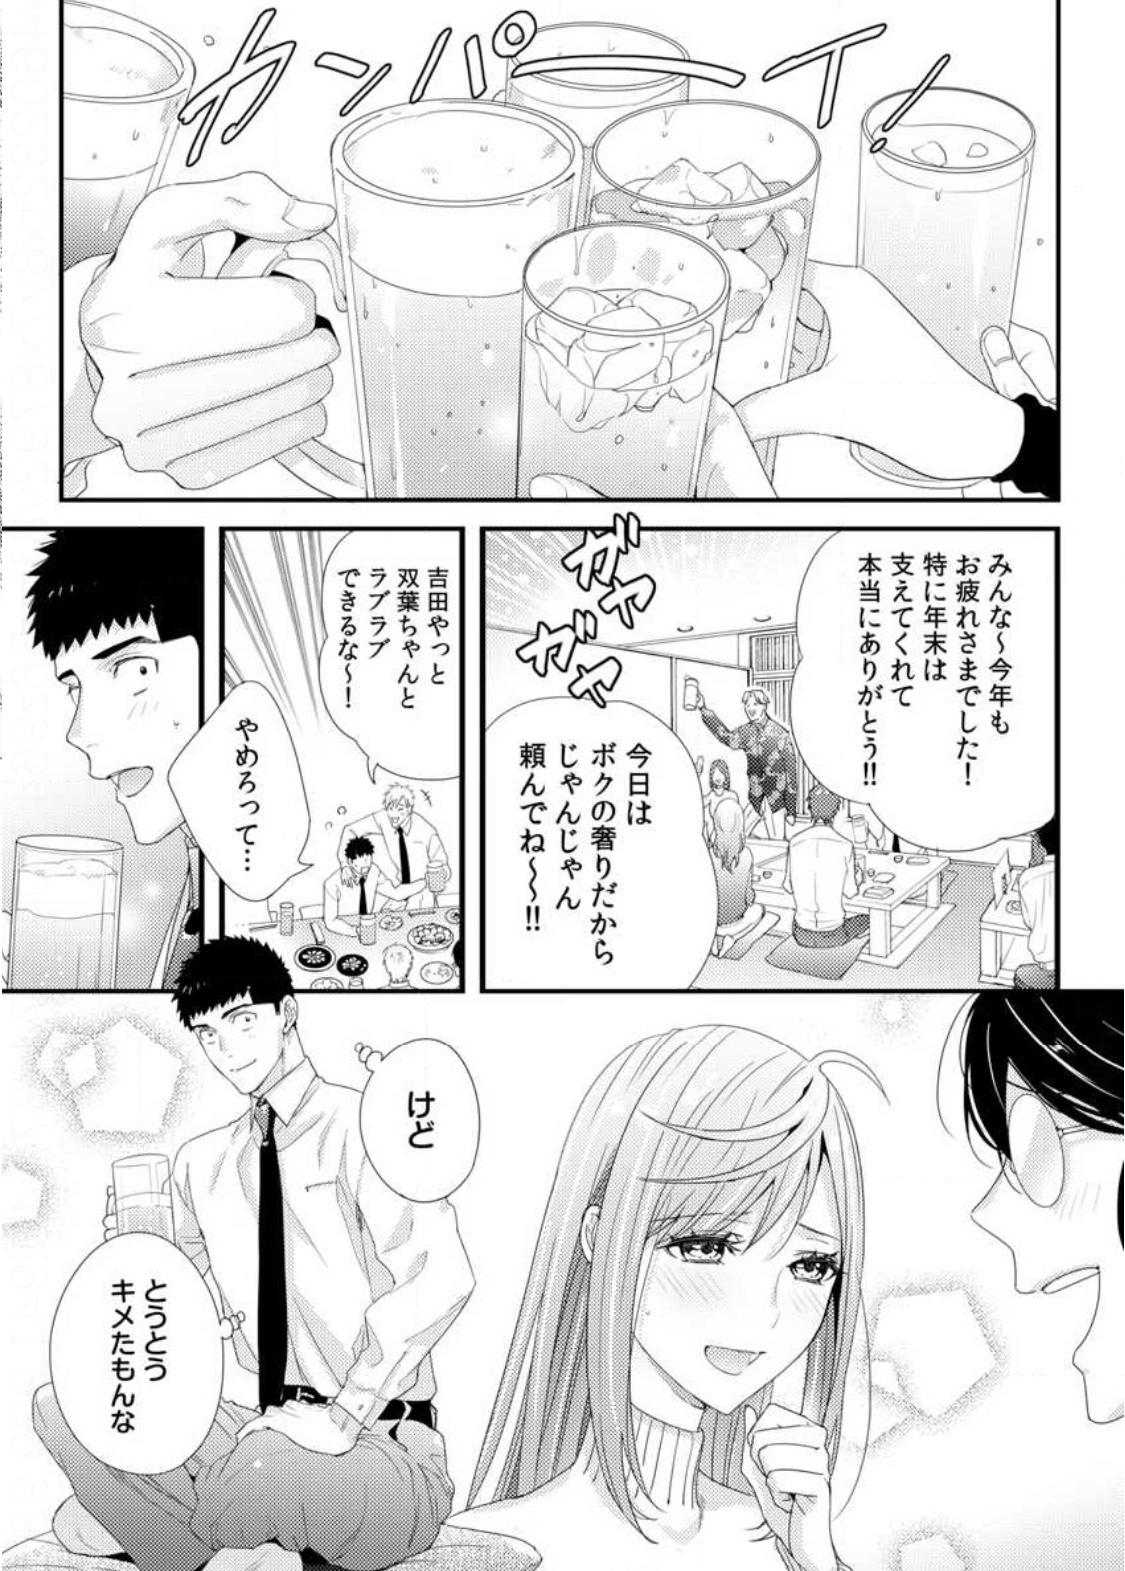 Please Let Me Hold You Futaba-San! Ch. 1-4 78